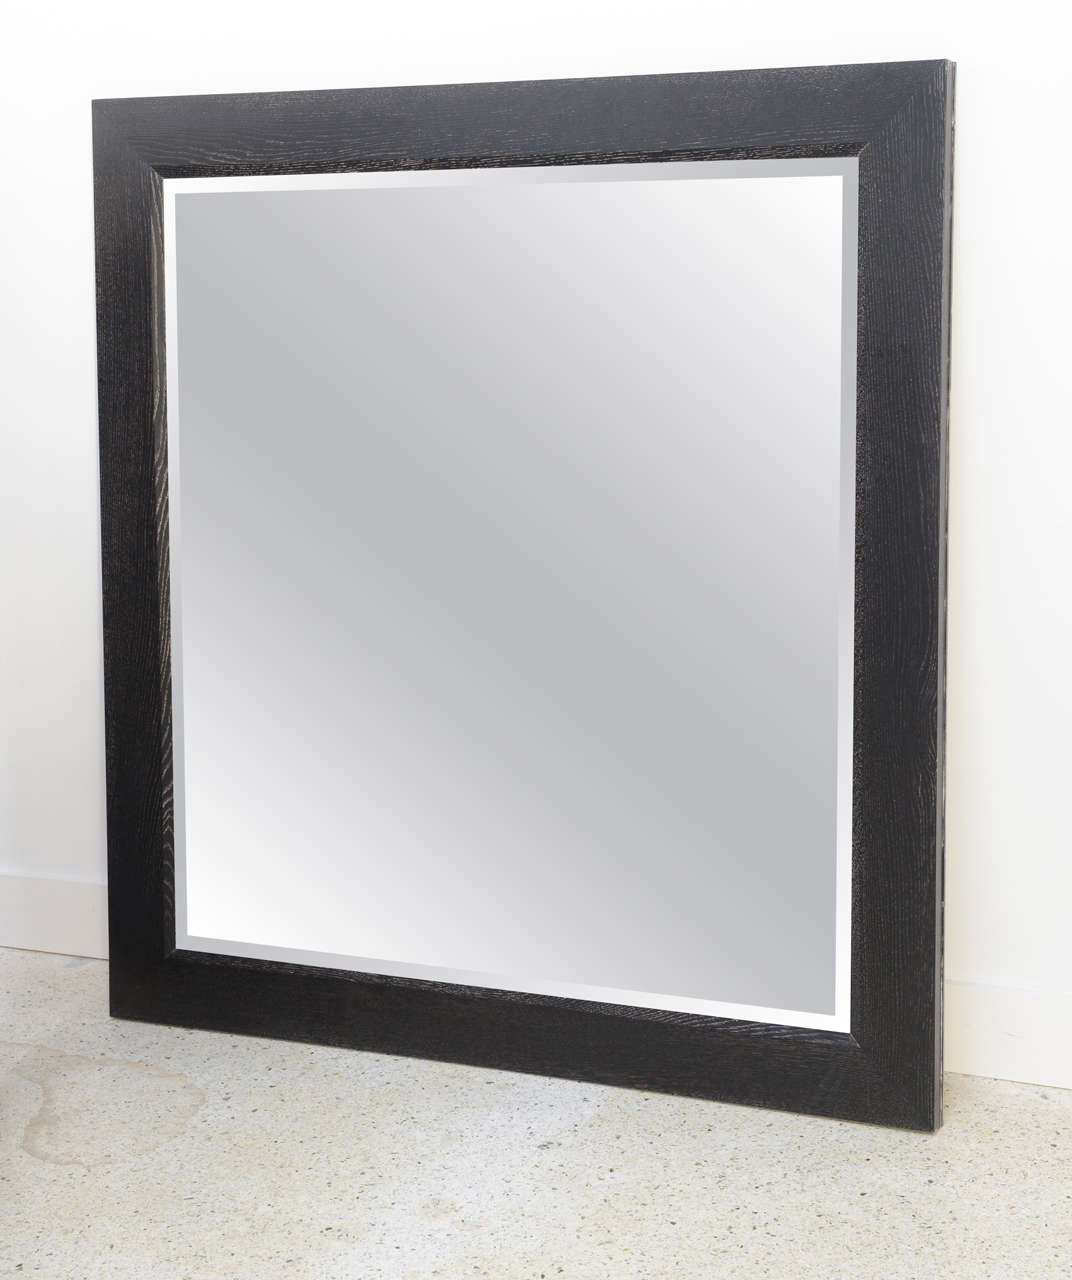 The frame with beveled edge surrounding a mirror
Custom designed by renowned designer Jamie Herzlinger
Designer Jamie Herzlinger, has established herself as a sought-after and well-respected member of the industry, including earning entree into